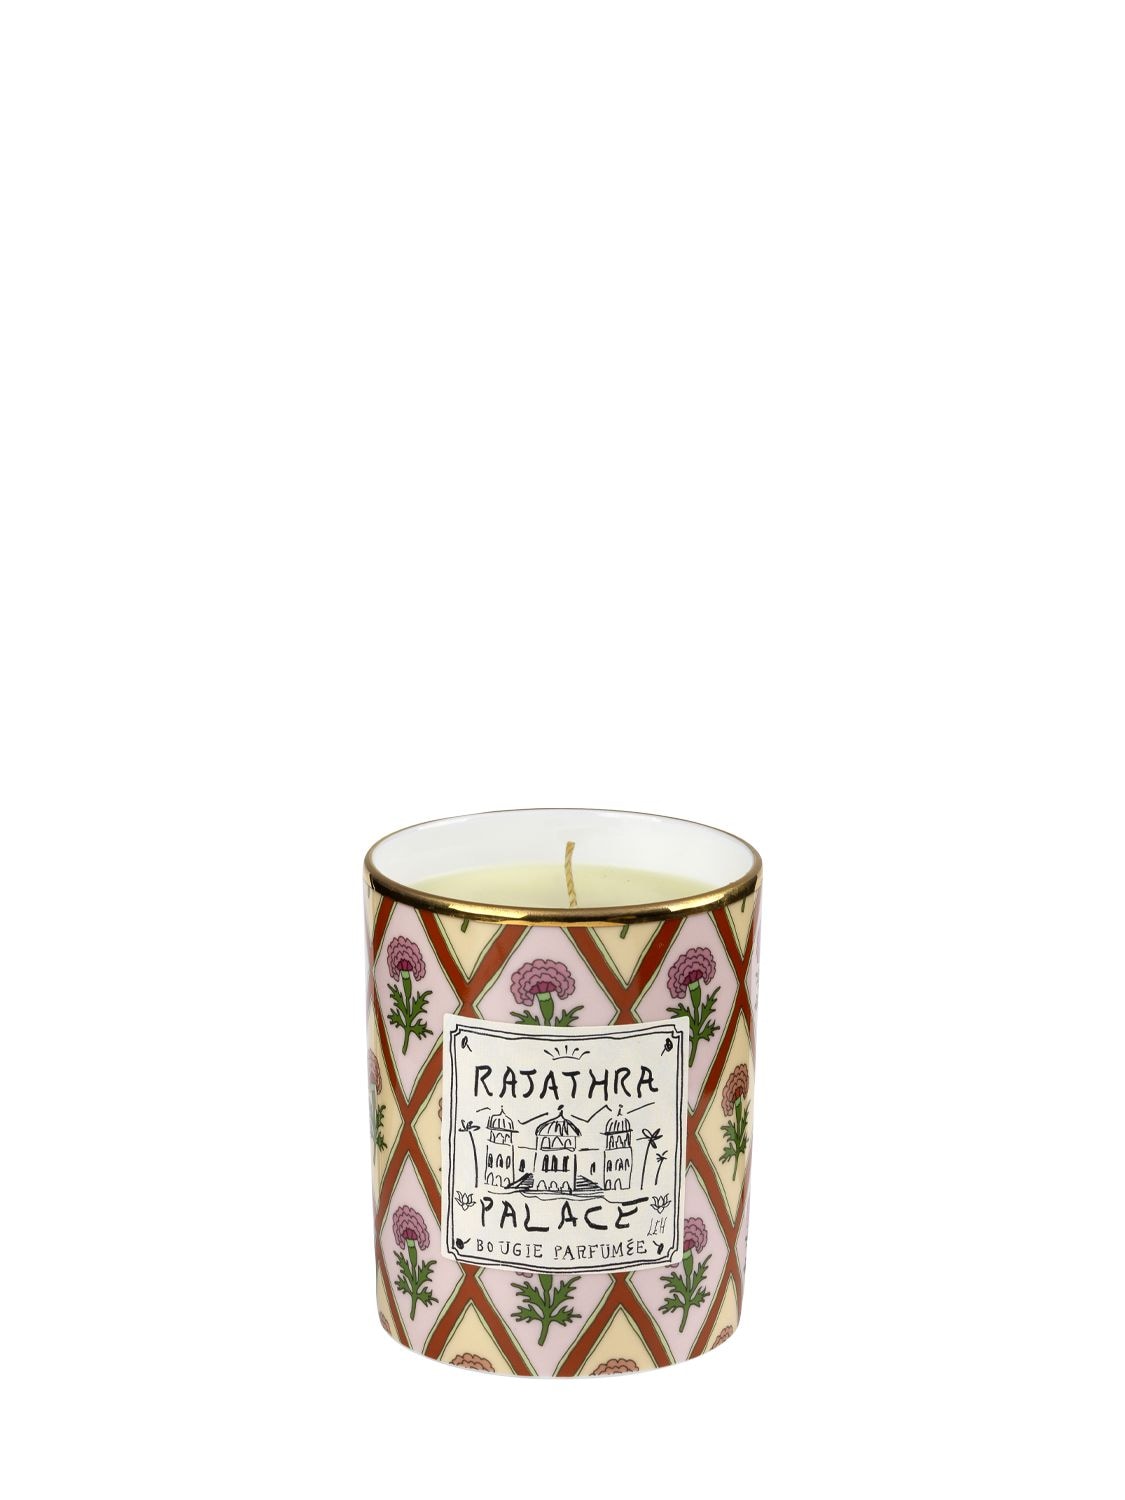 Image of Rajathra Palace Regular Scented Candle